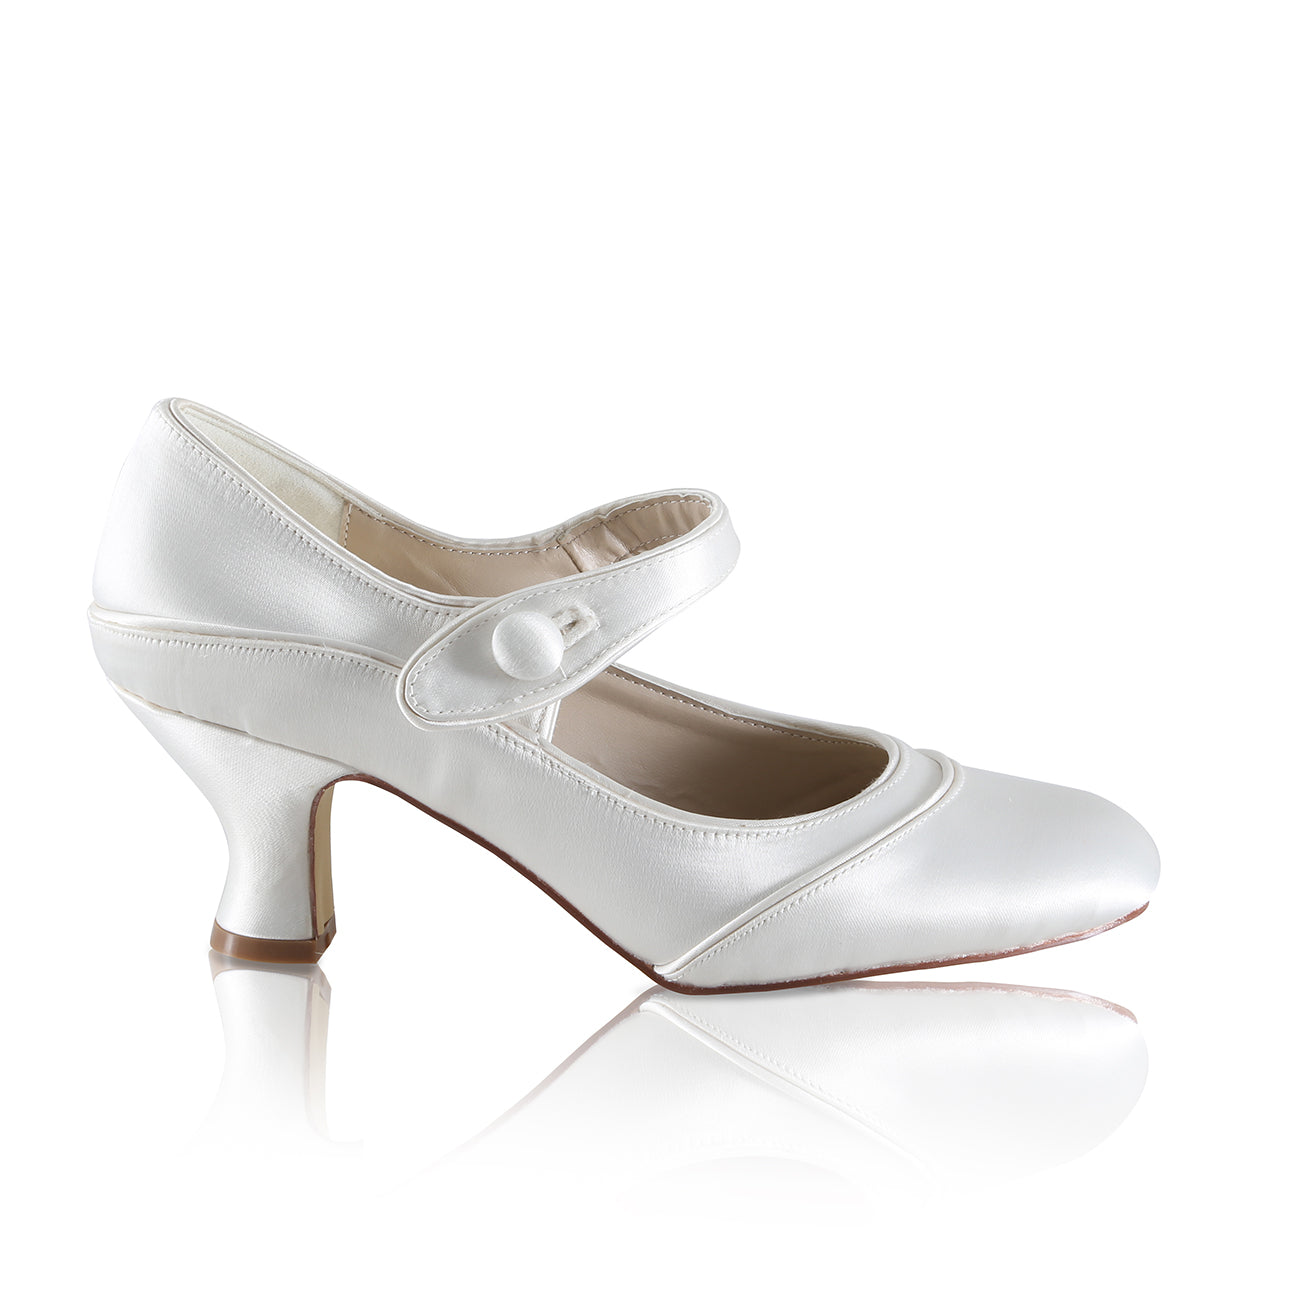 wide fit mary jane shoes uk